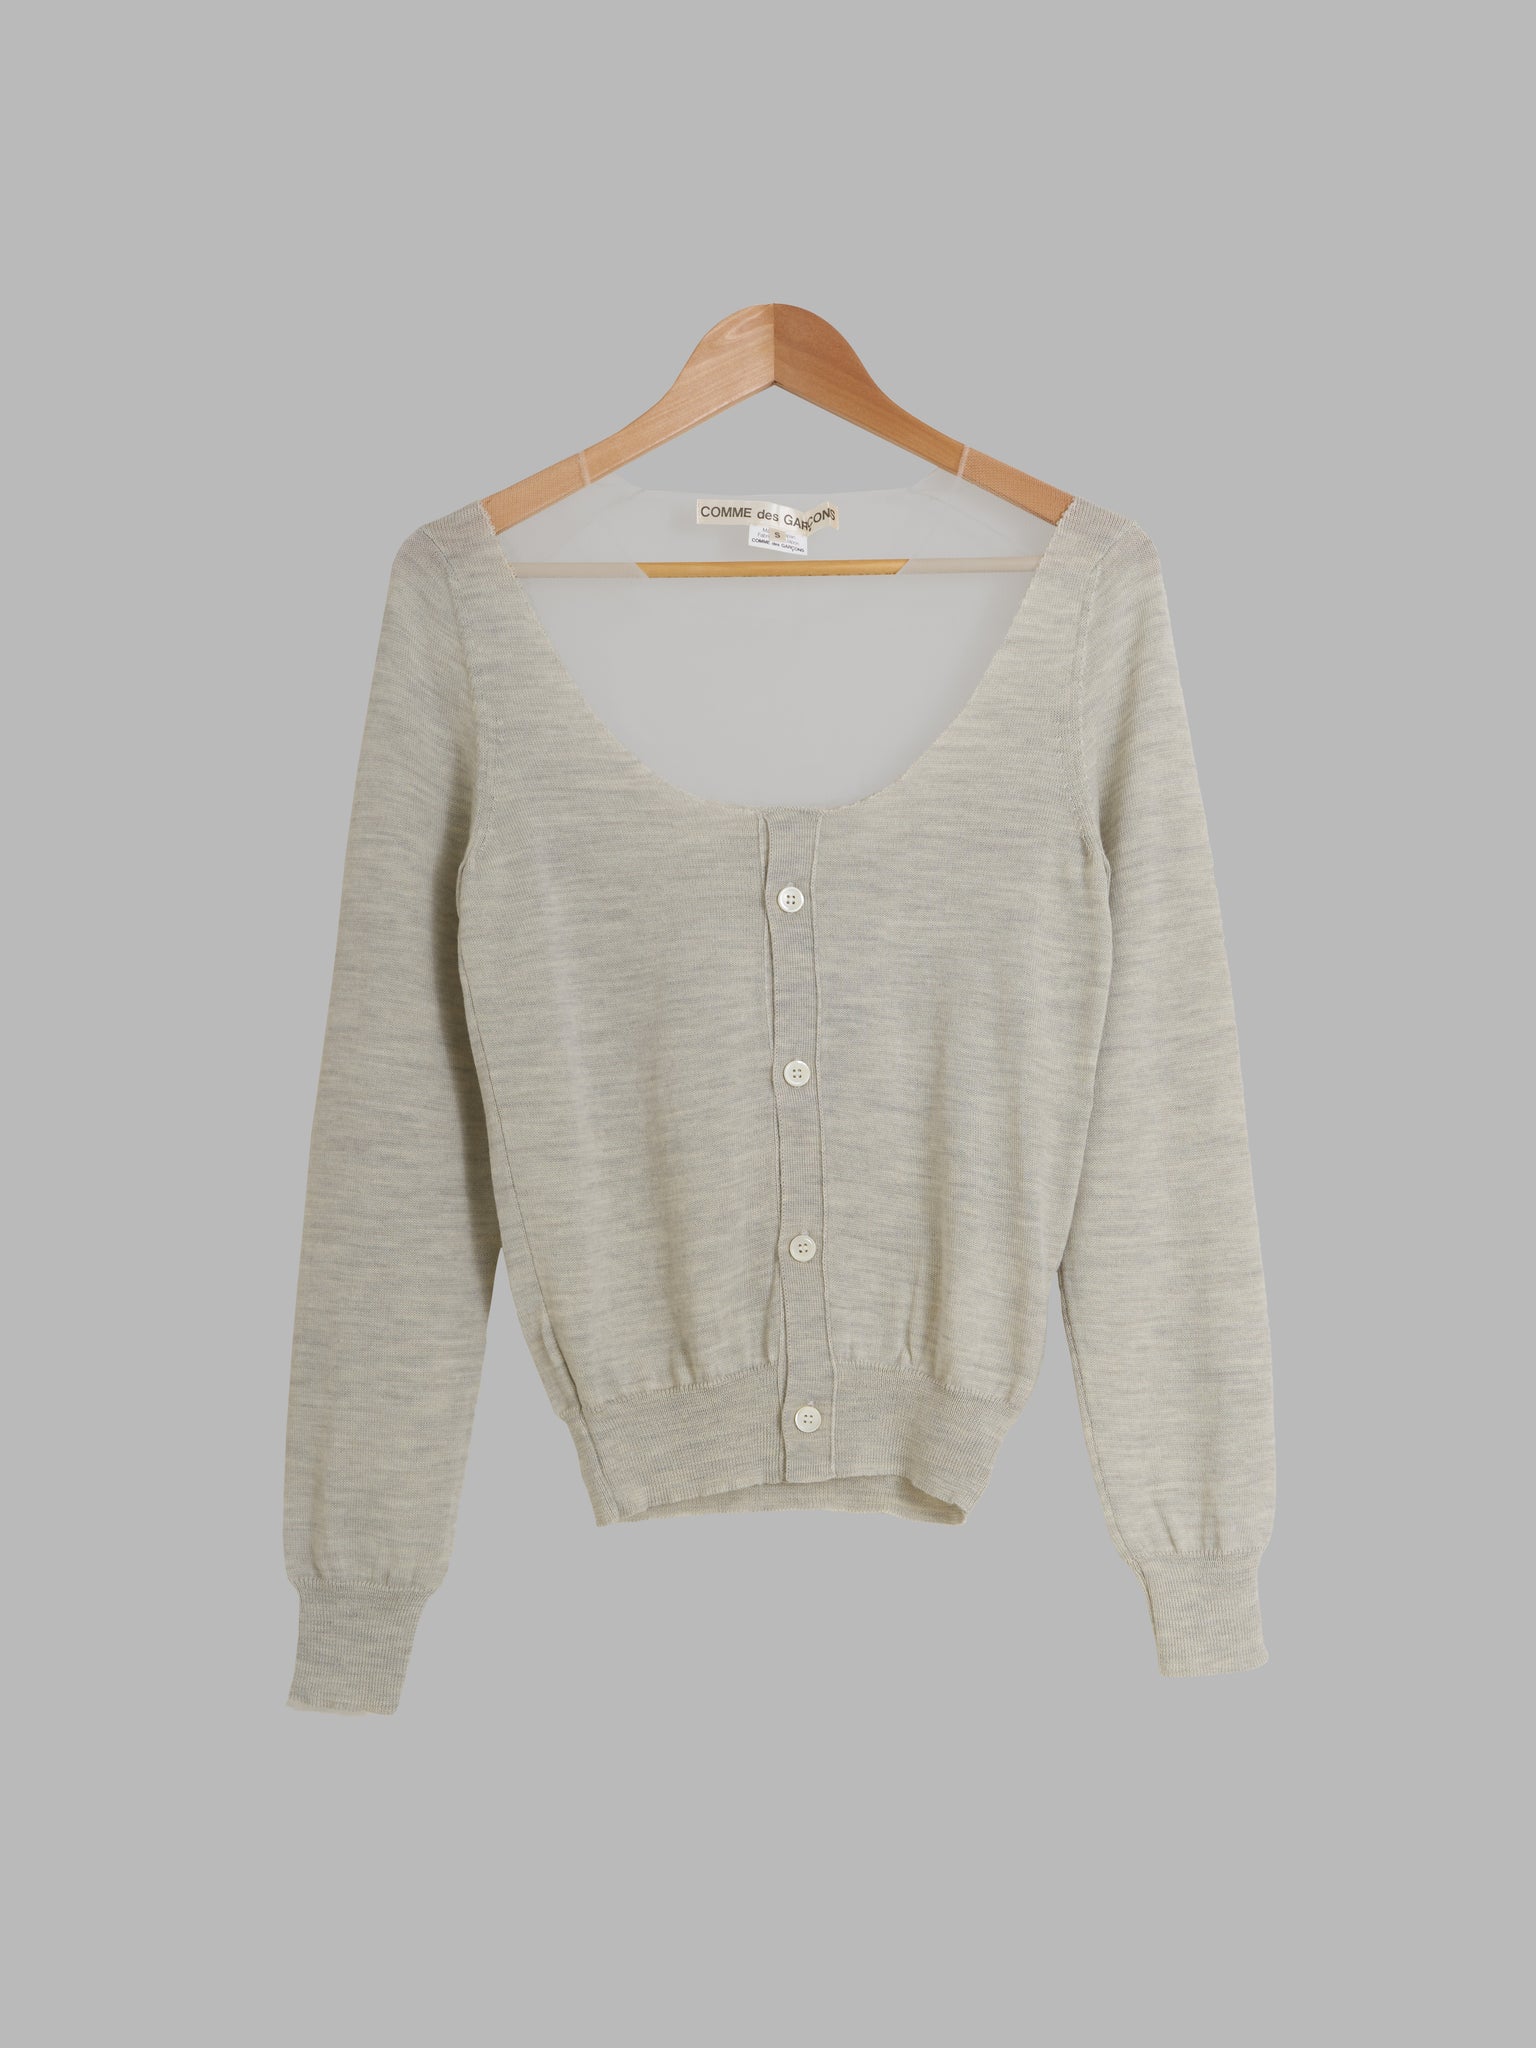 Comme des Garcons 2006 oatmeal wool and mesh cardigan - size S